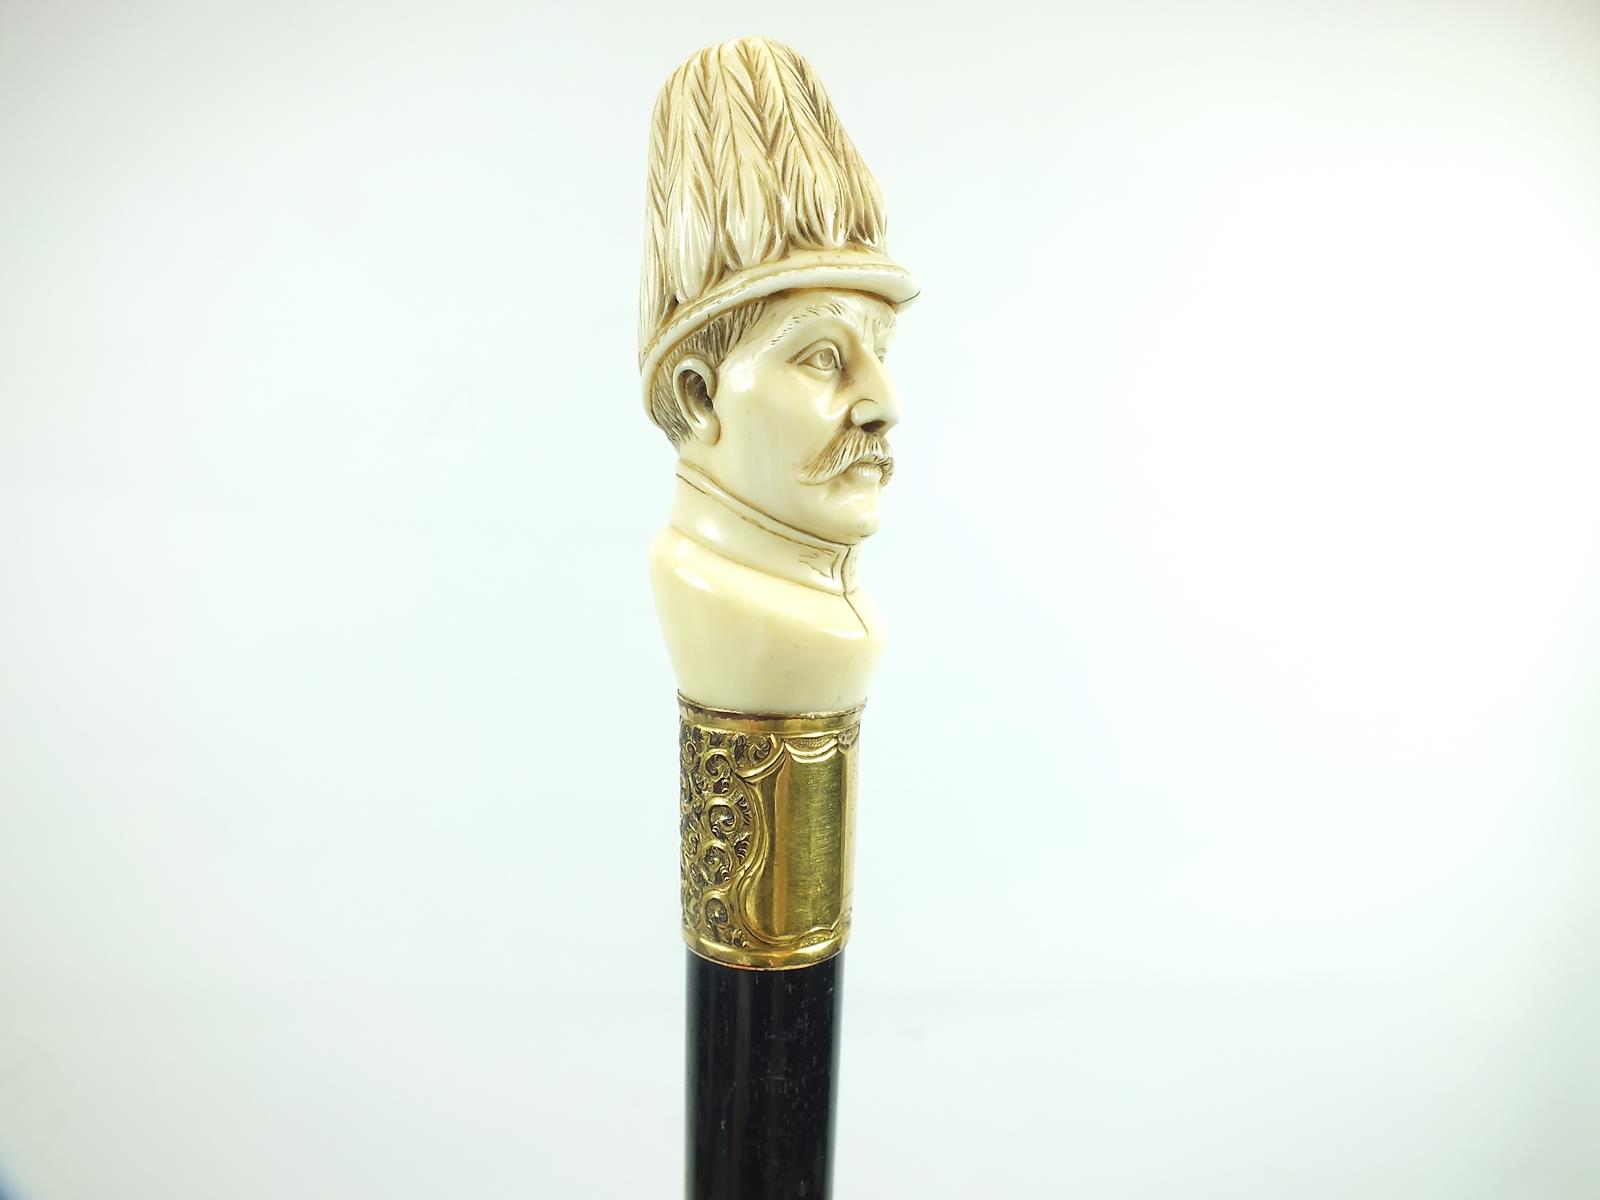 A LATE 19TH/EARLY 20TH CENTURY WALKING CANE, the pommel carved as the head of an officer